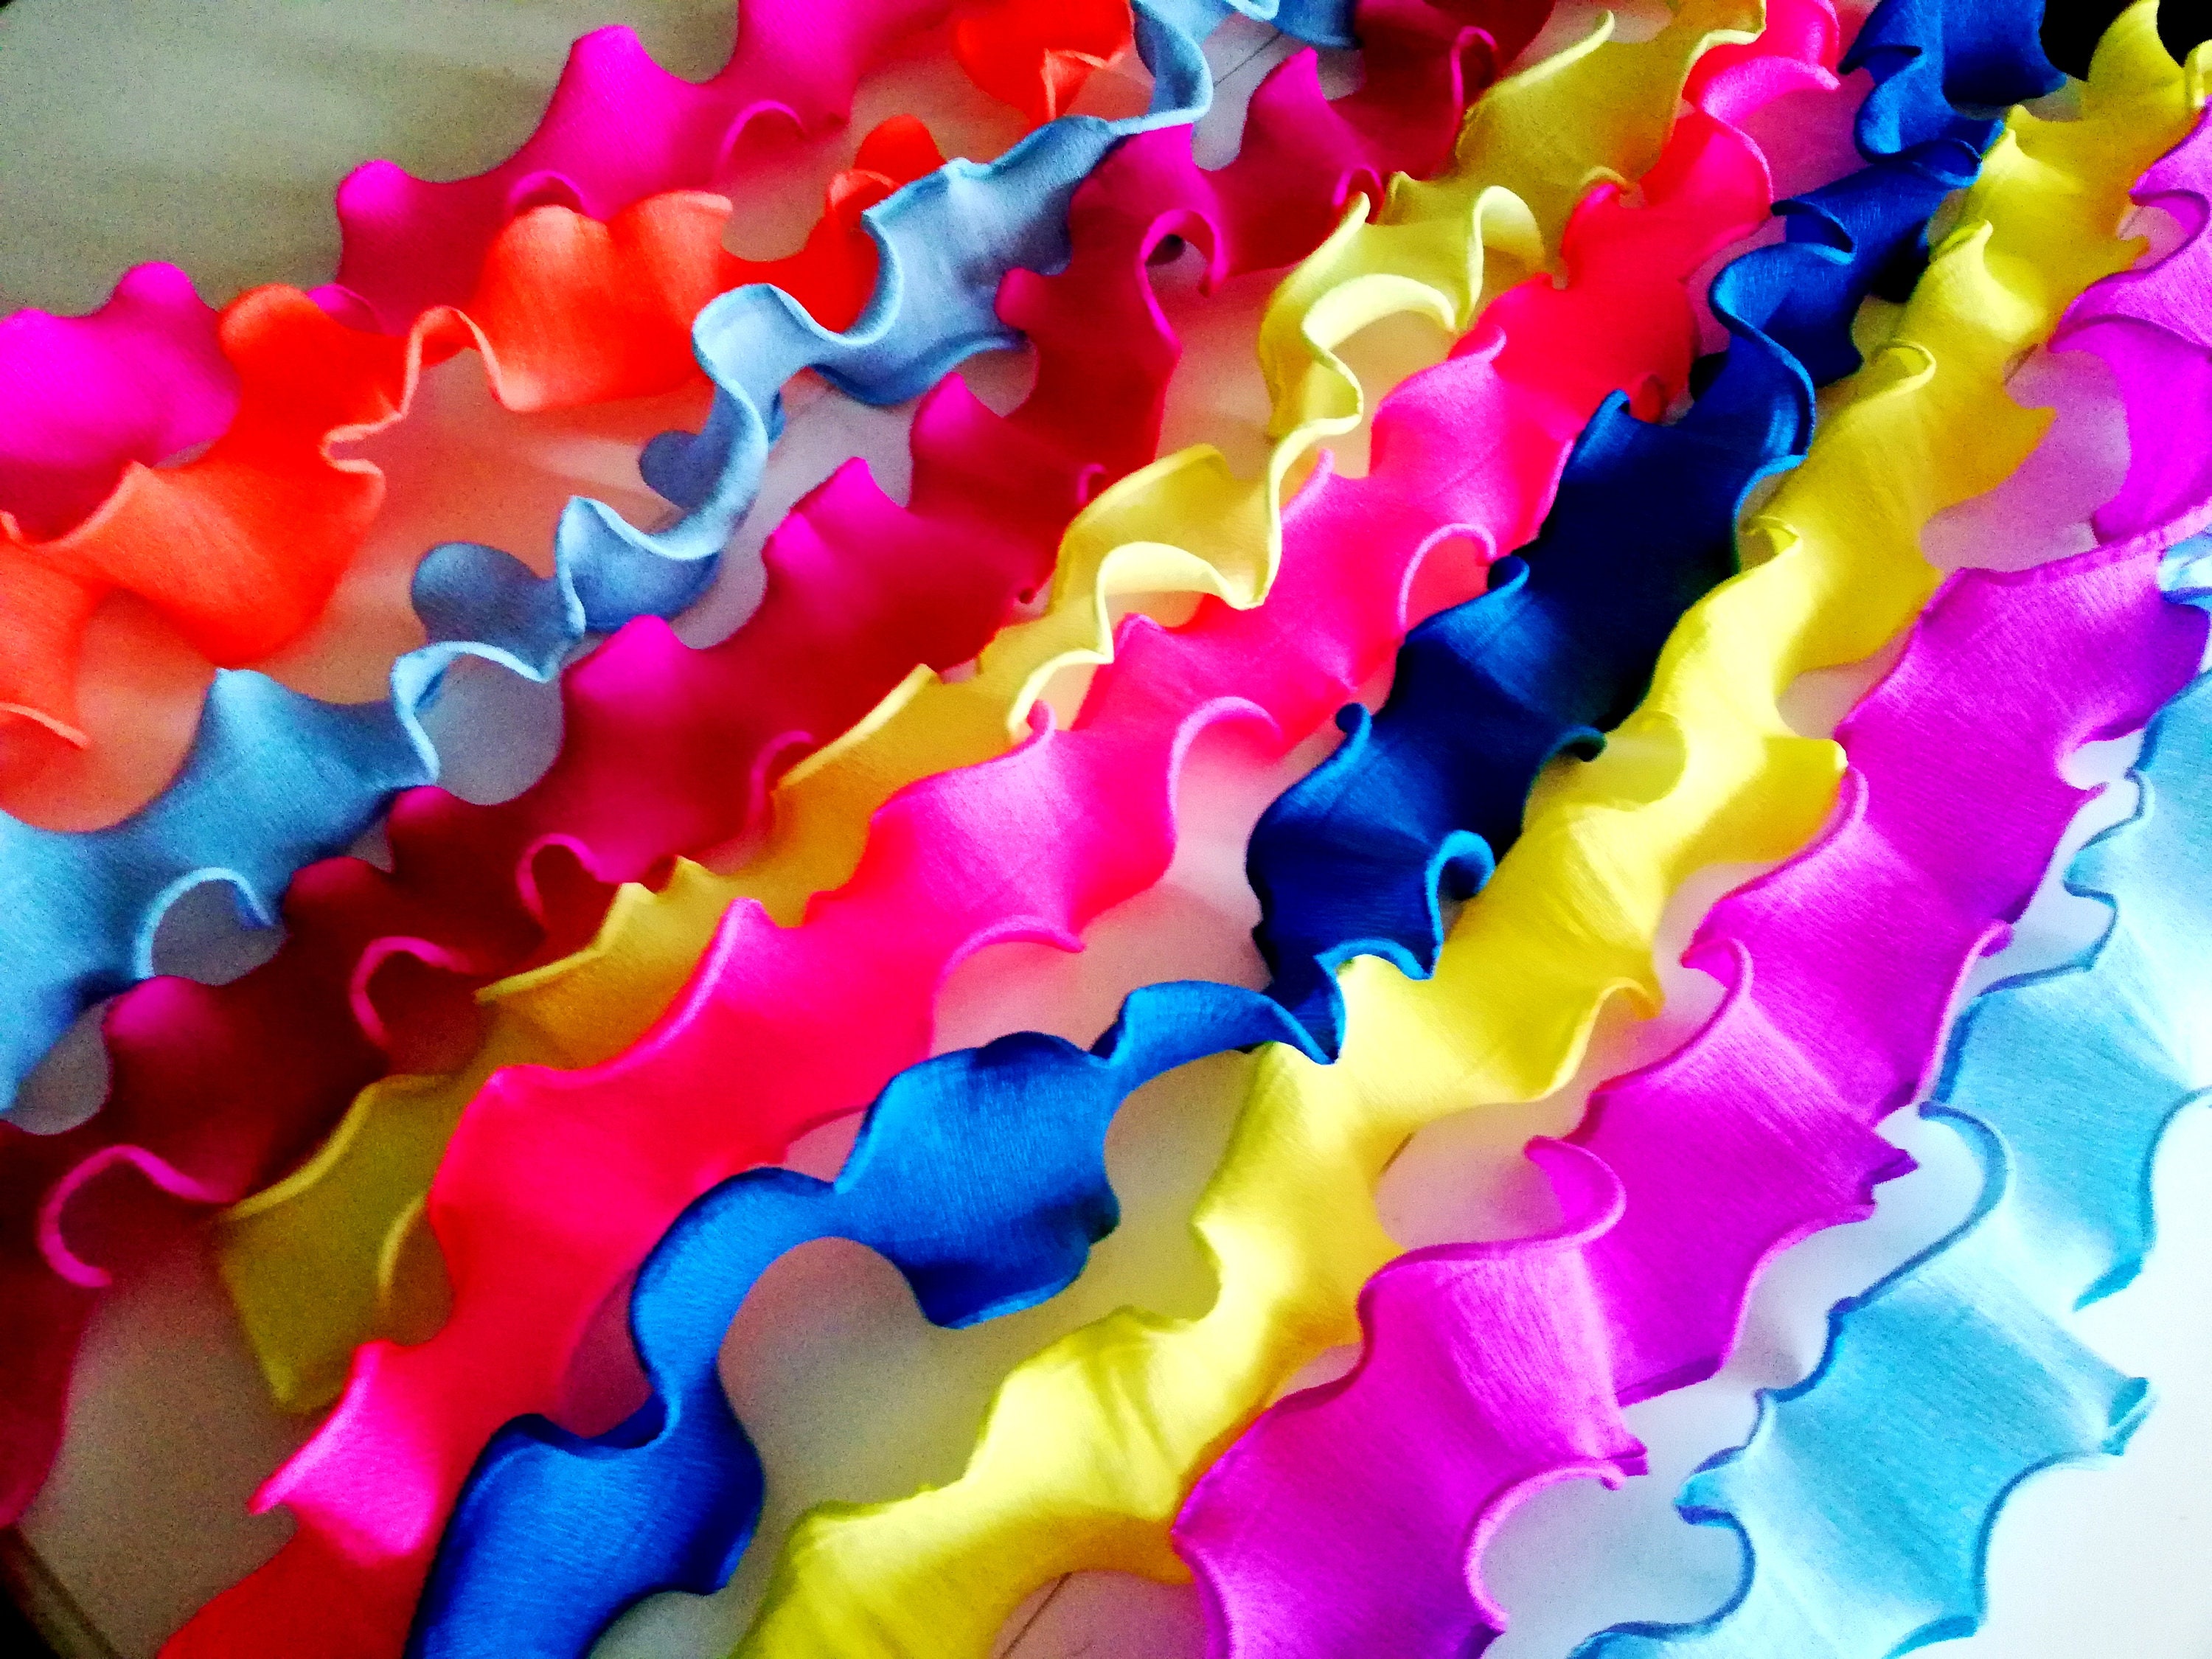 Rainbow, Streamers Backdrop, Fiesta Mexican, Crepe Paper Garlands, Moana  Coco Party Baby Shower Decor Wedding Bachelorette Tropical Hawaiian -   Norway